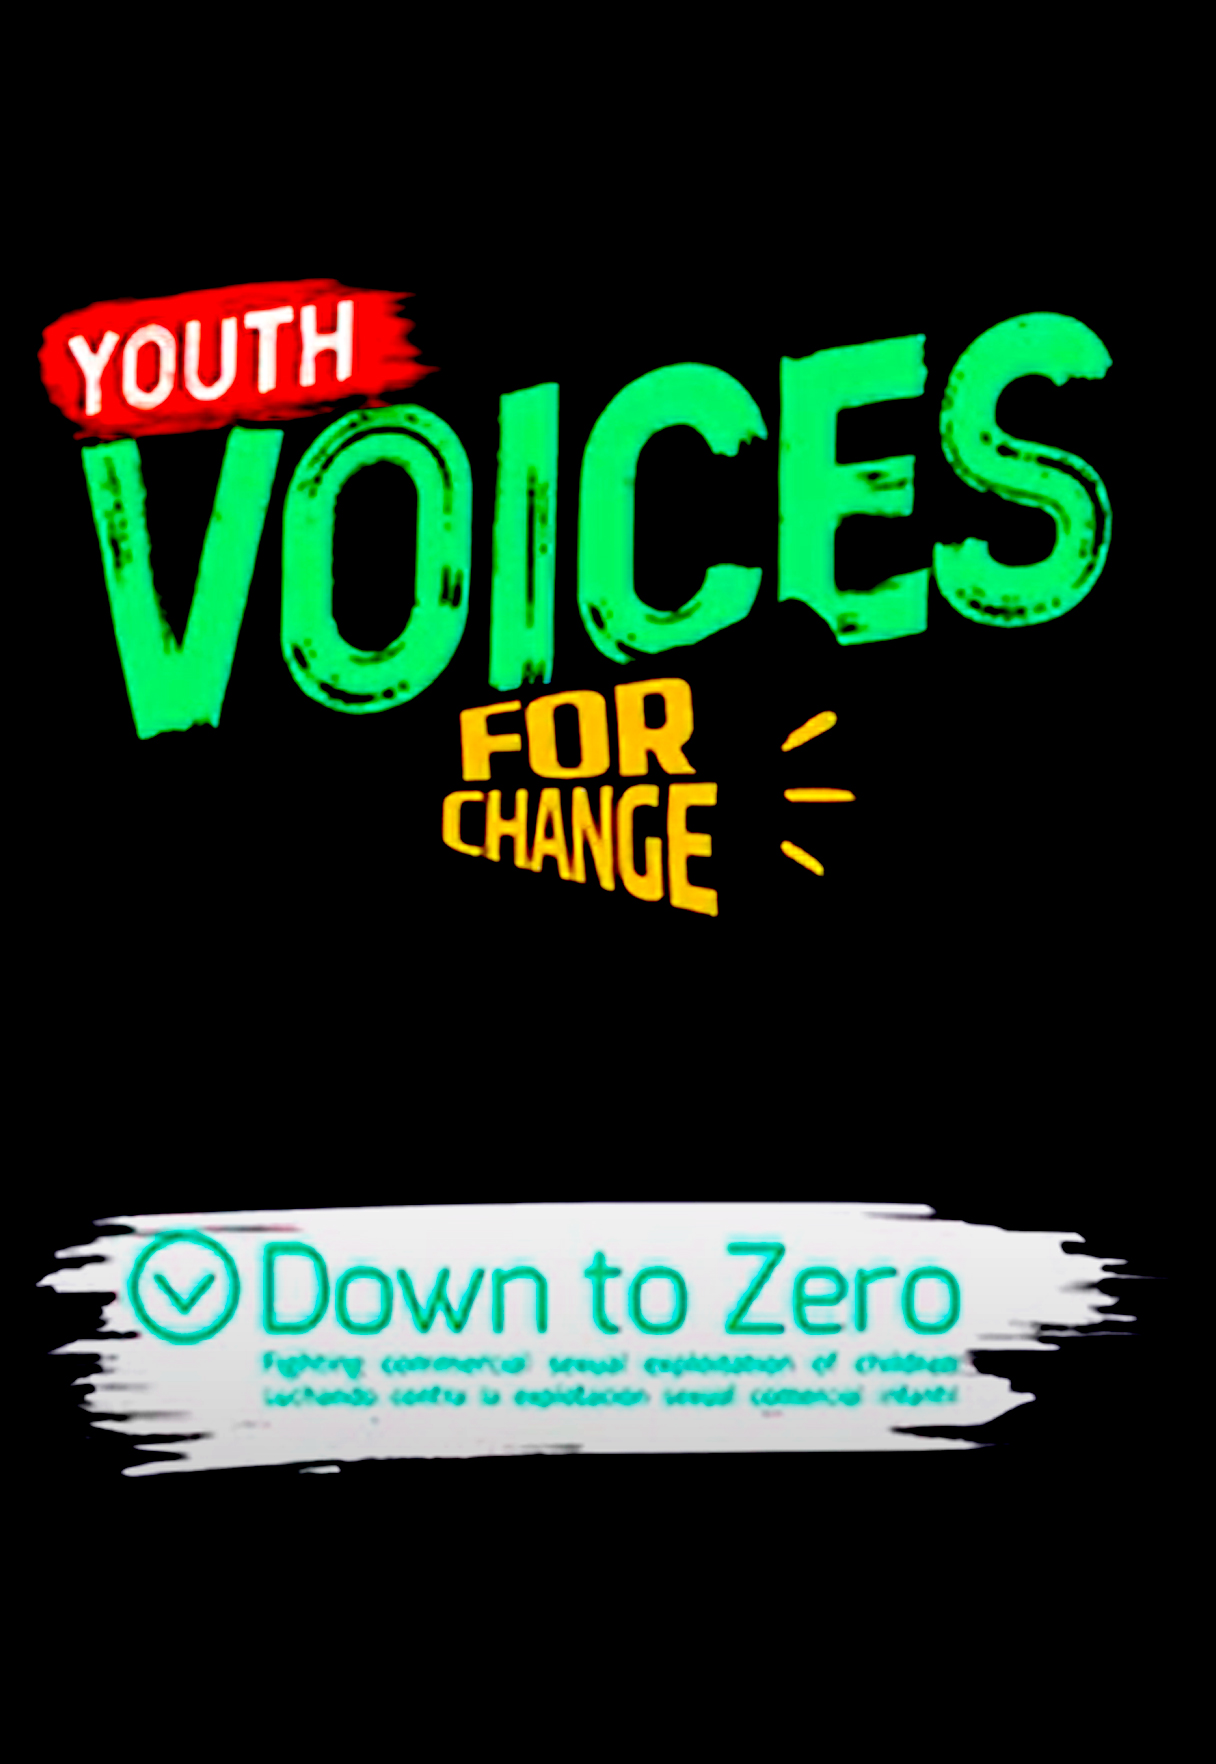 Voice for Change